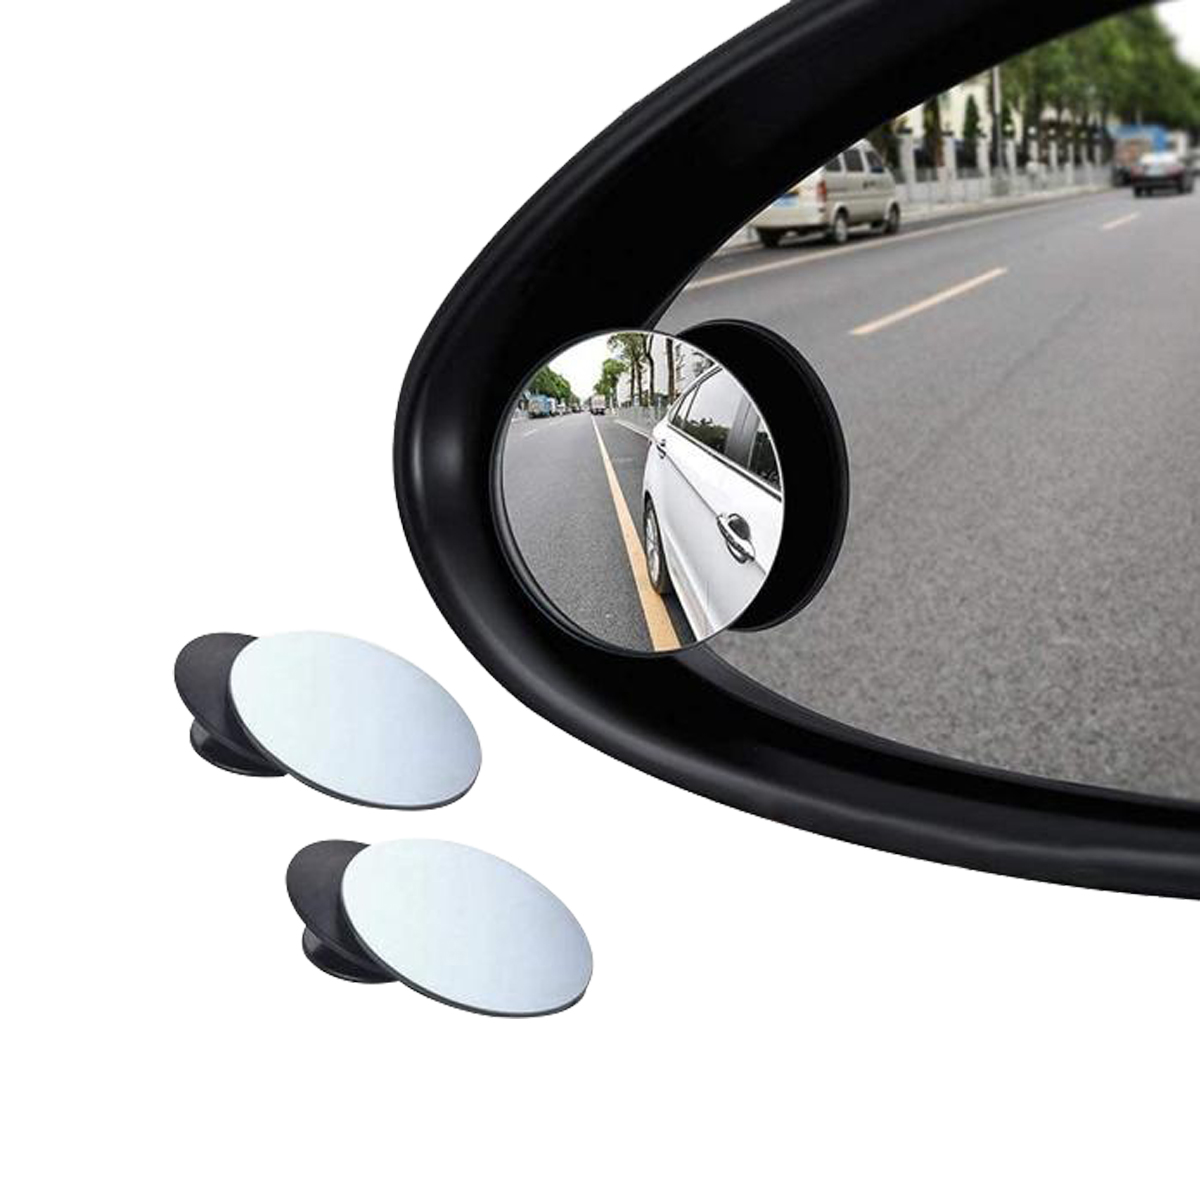 mothers-day-gift-guide/images/Blind-Spot-Mirror-partsavatar-canada.jpeg